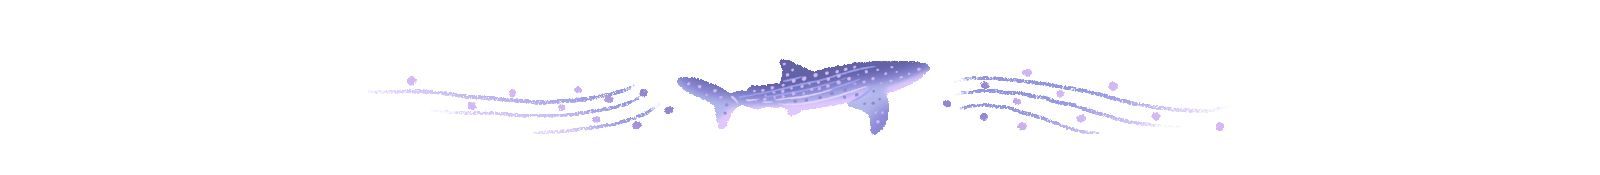 Illustration of whale shark used to divide story text